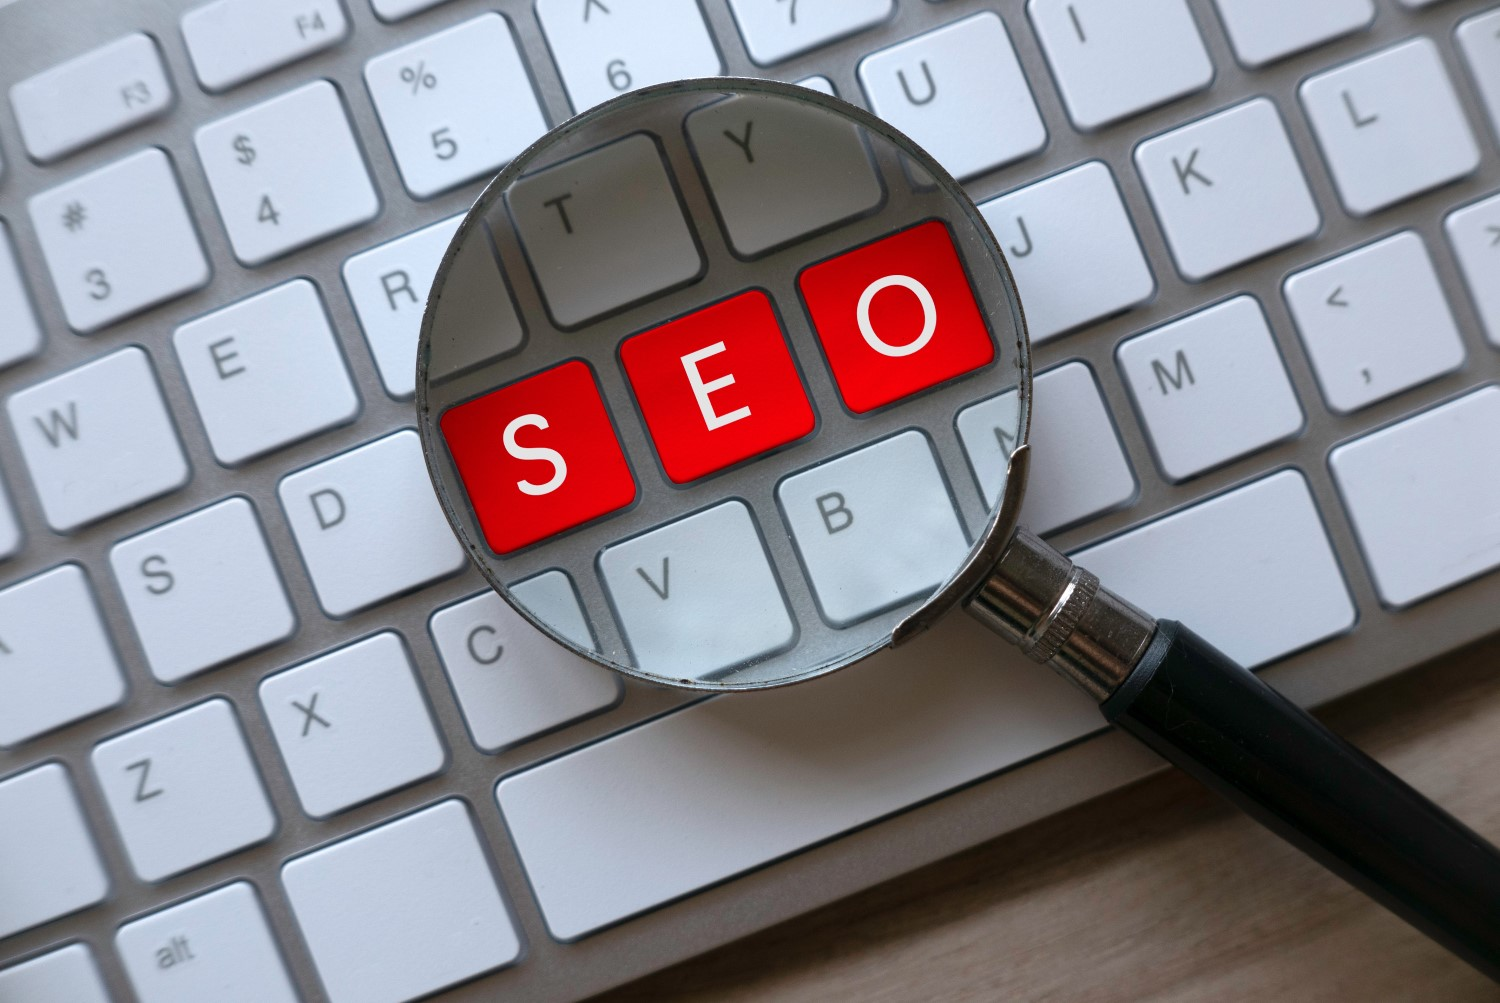 SEO for organic search engine optimization using keyword research